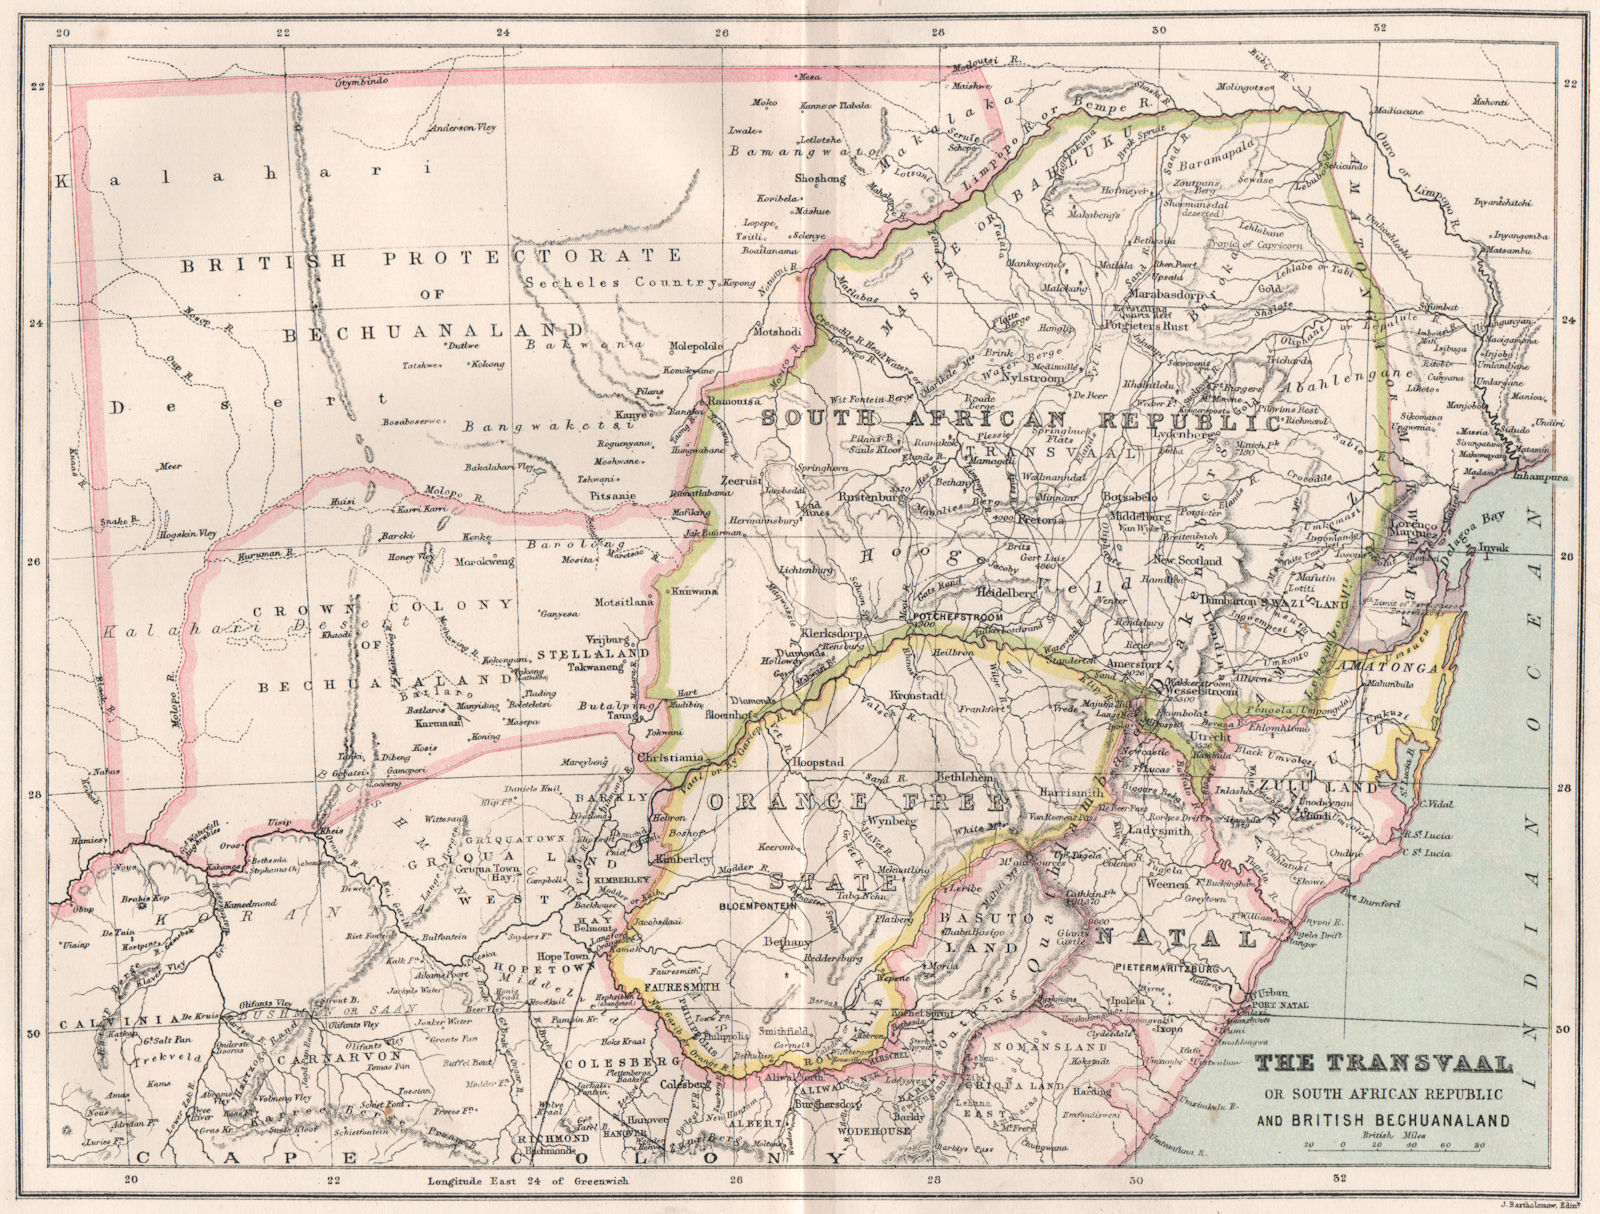 Transvaal or South African Republic & British Bechuanaland (Botswana) 1886 map